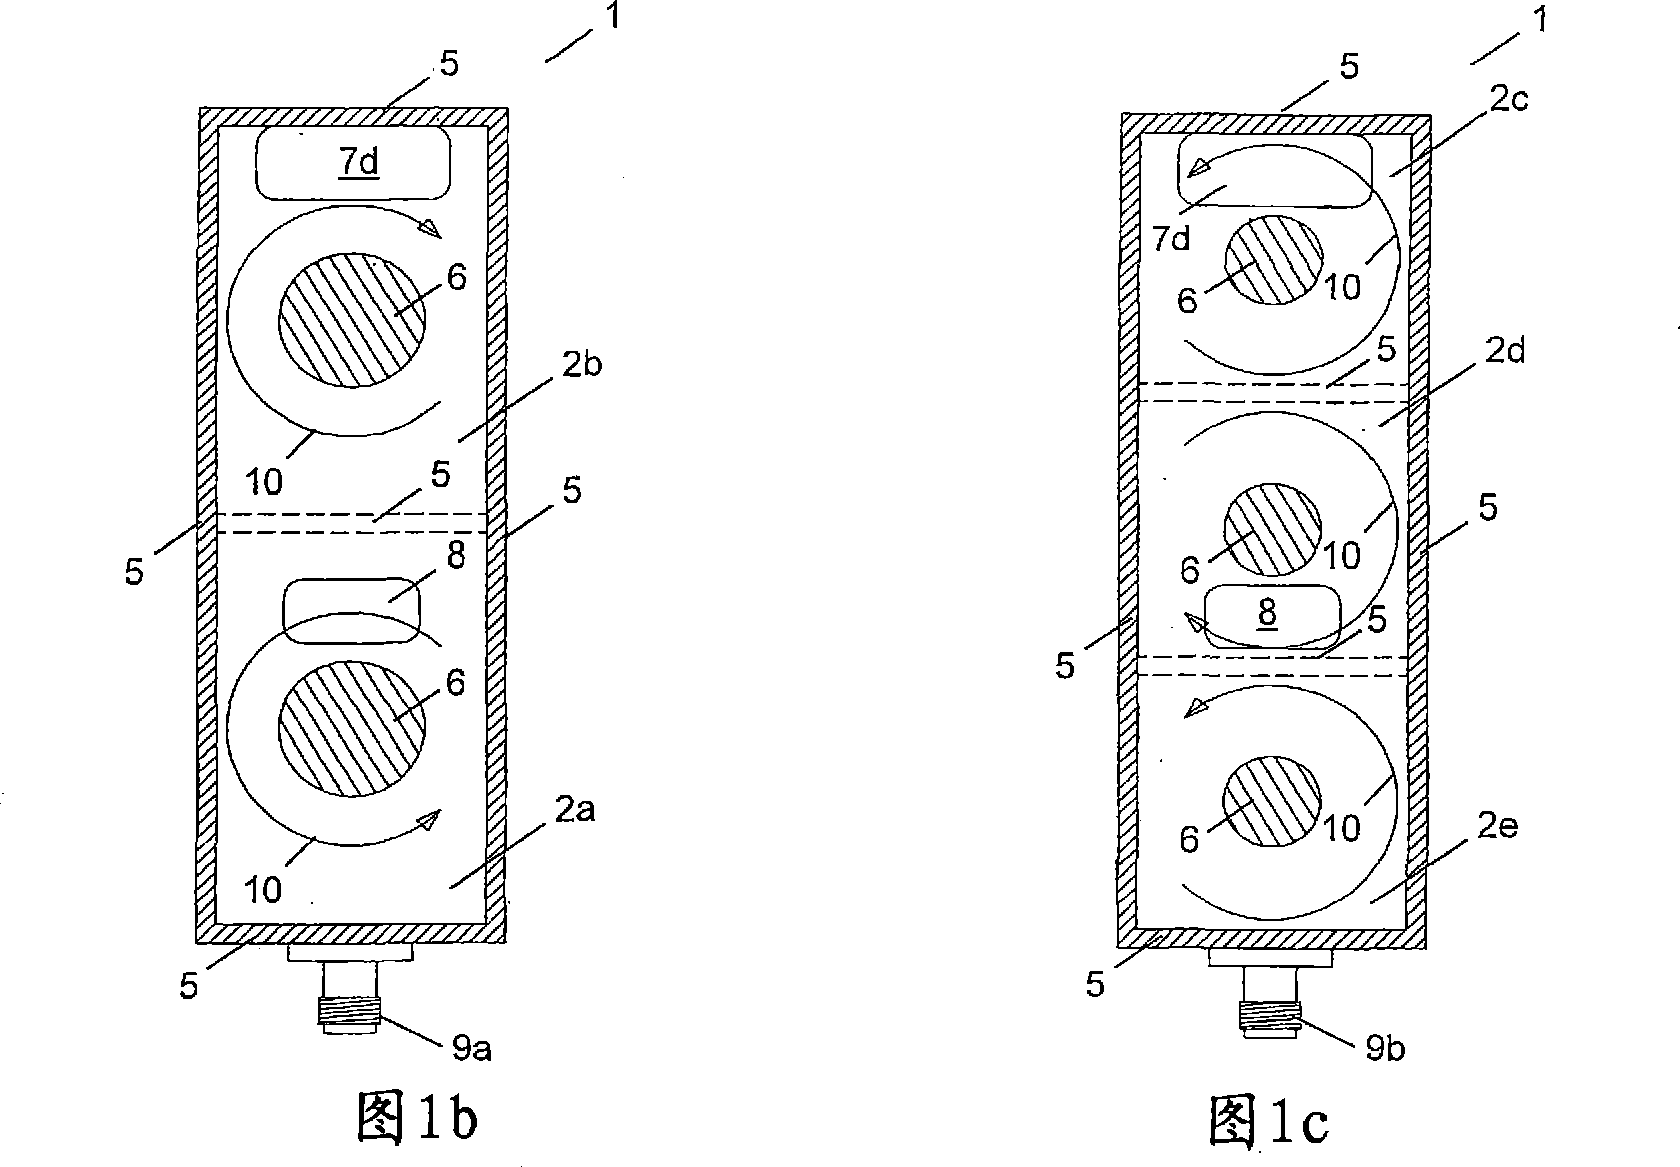 Microwave filter including an end-wall coupled coaxial resonator